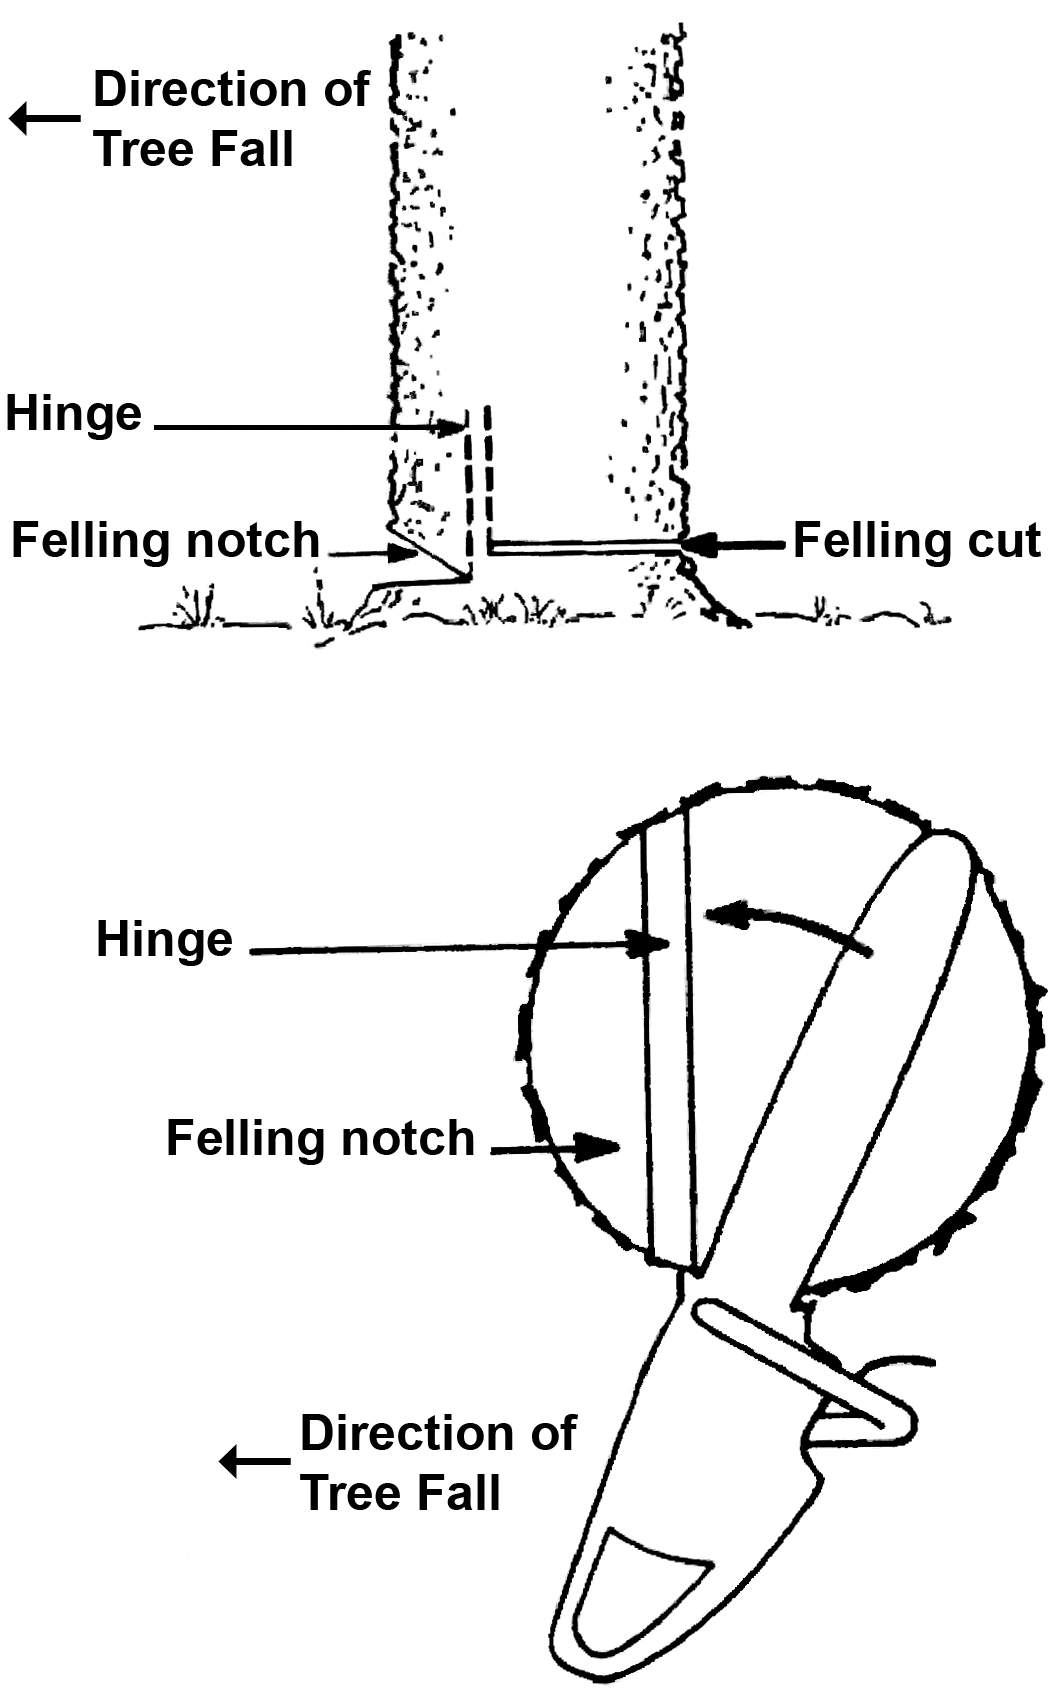 Diagram of cuts to fell a tree. Cut felling notch on the side the tree will fall. The felling cut is on the opposite side of the trunk to the felling notch and goes the rest of the way through the tree.